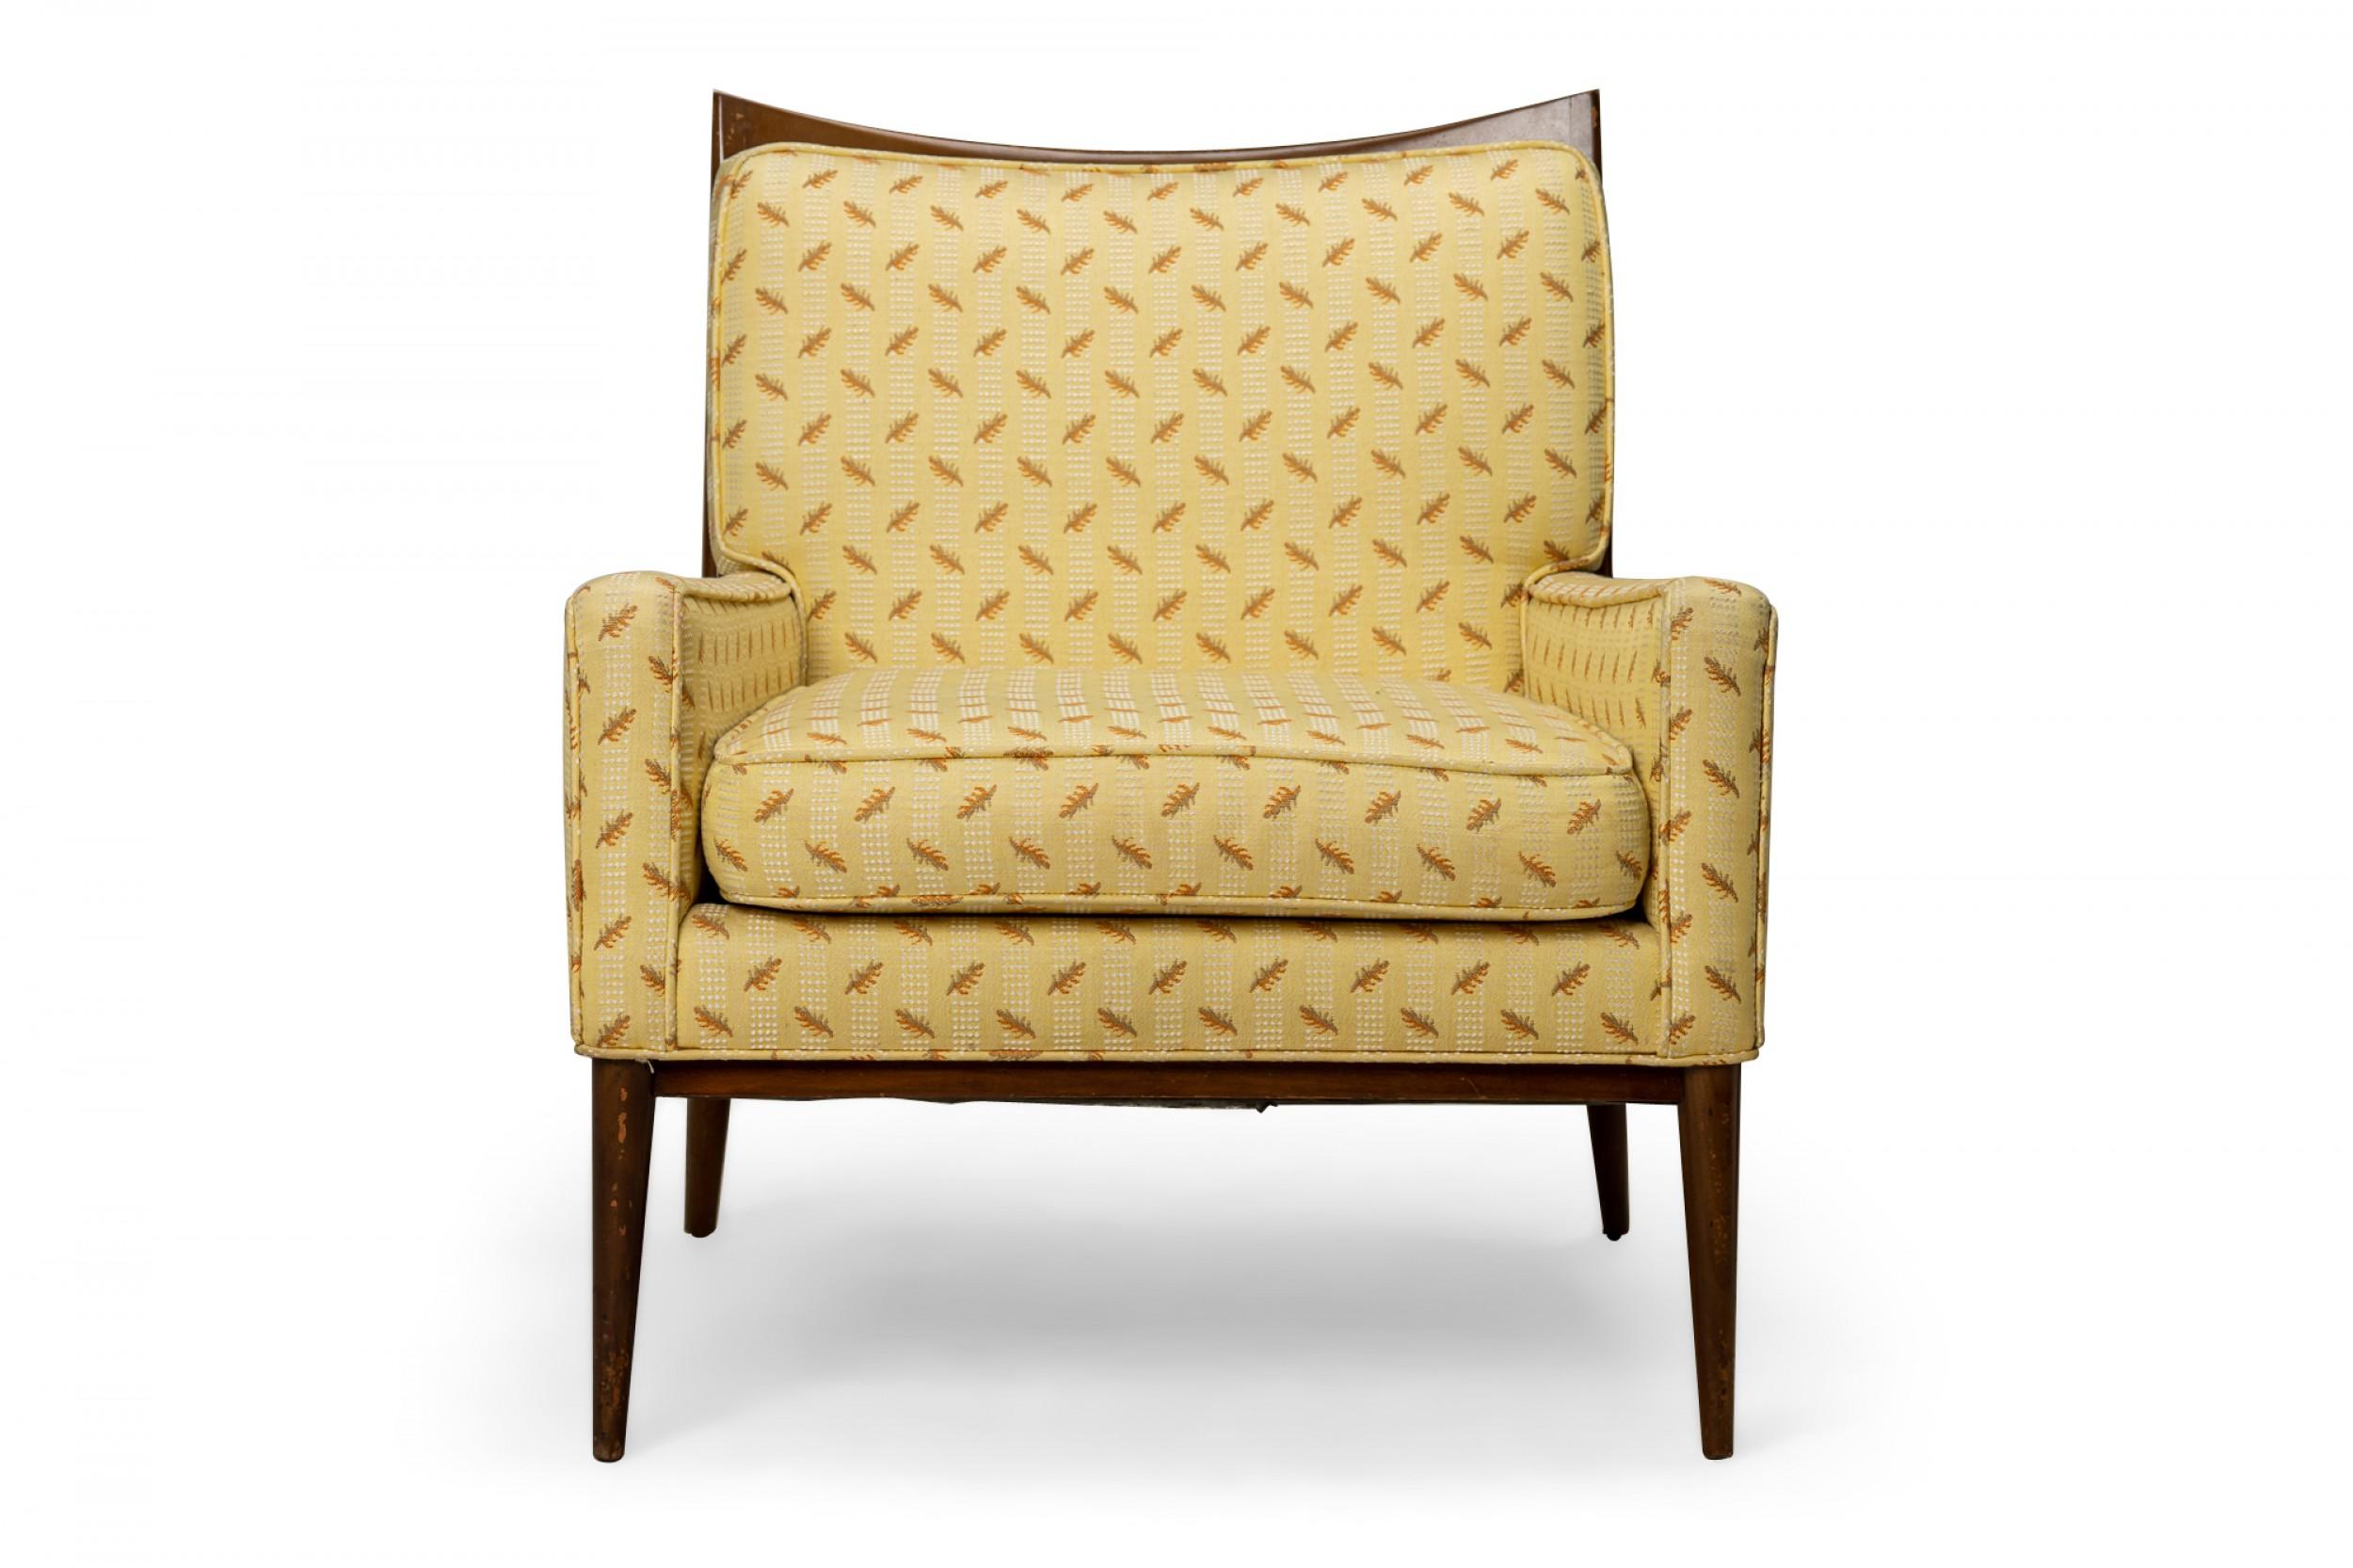 American Mid-Century lounge / armchair with a stained walnut frame with a scooped back rail and yellow fabric upholstery with a small pattern of orange and brown autumn leaves and white dots, resting on four tapered dowel legs. (PAUL MCCOBB FOR